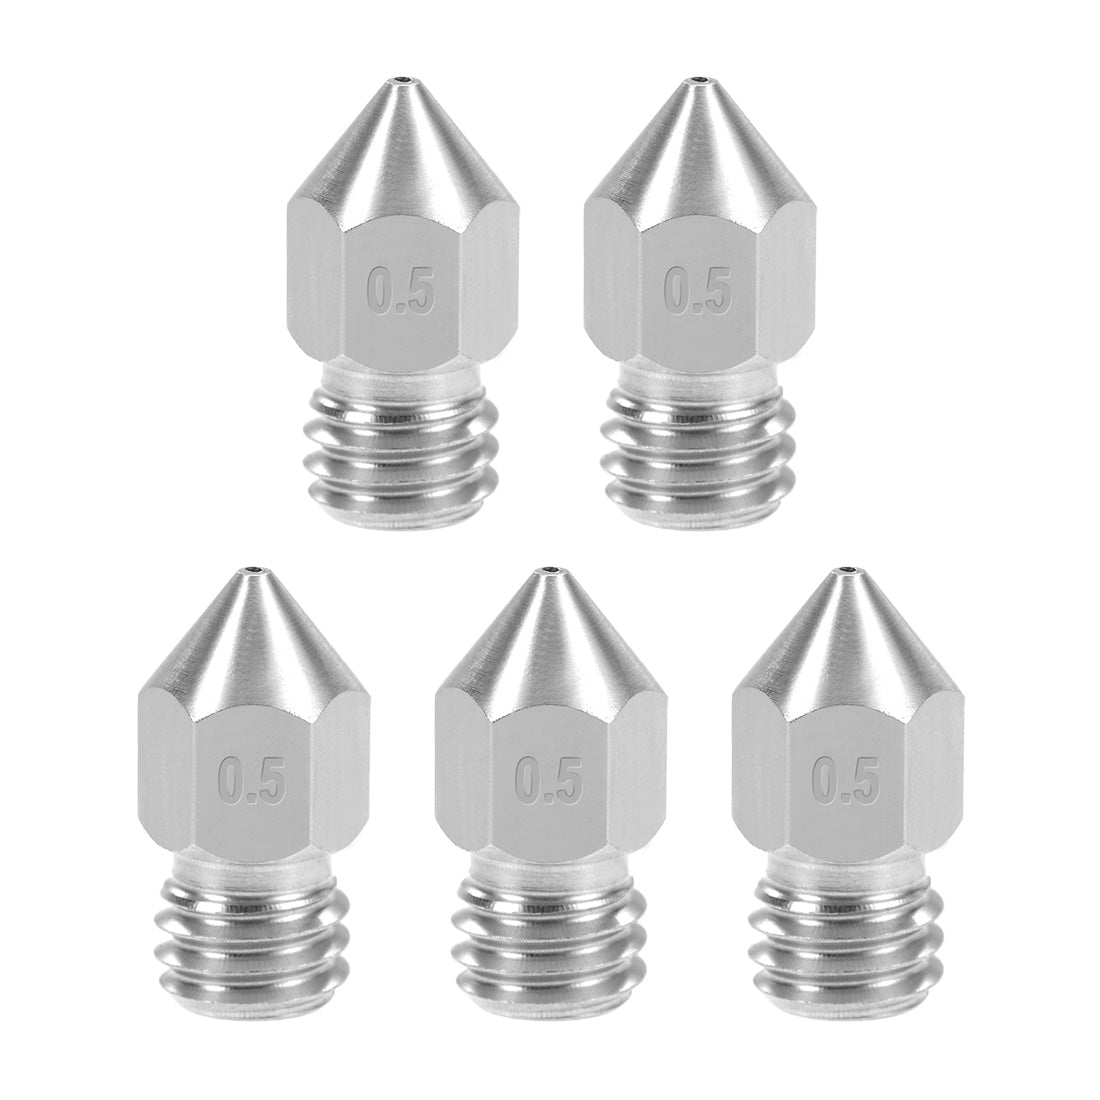 uxcell Uxcell 0.5mm 3D Printer Nozzles Head M6 Thread Replacement for MK8 1.75mm Extruder Print, Stainless Steel 5pcs